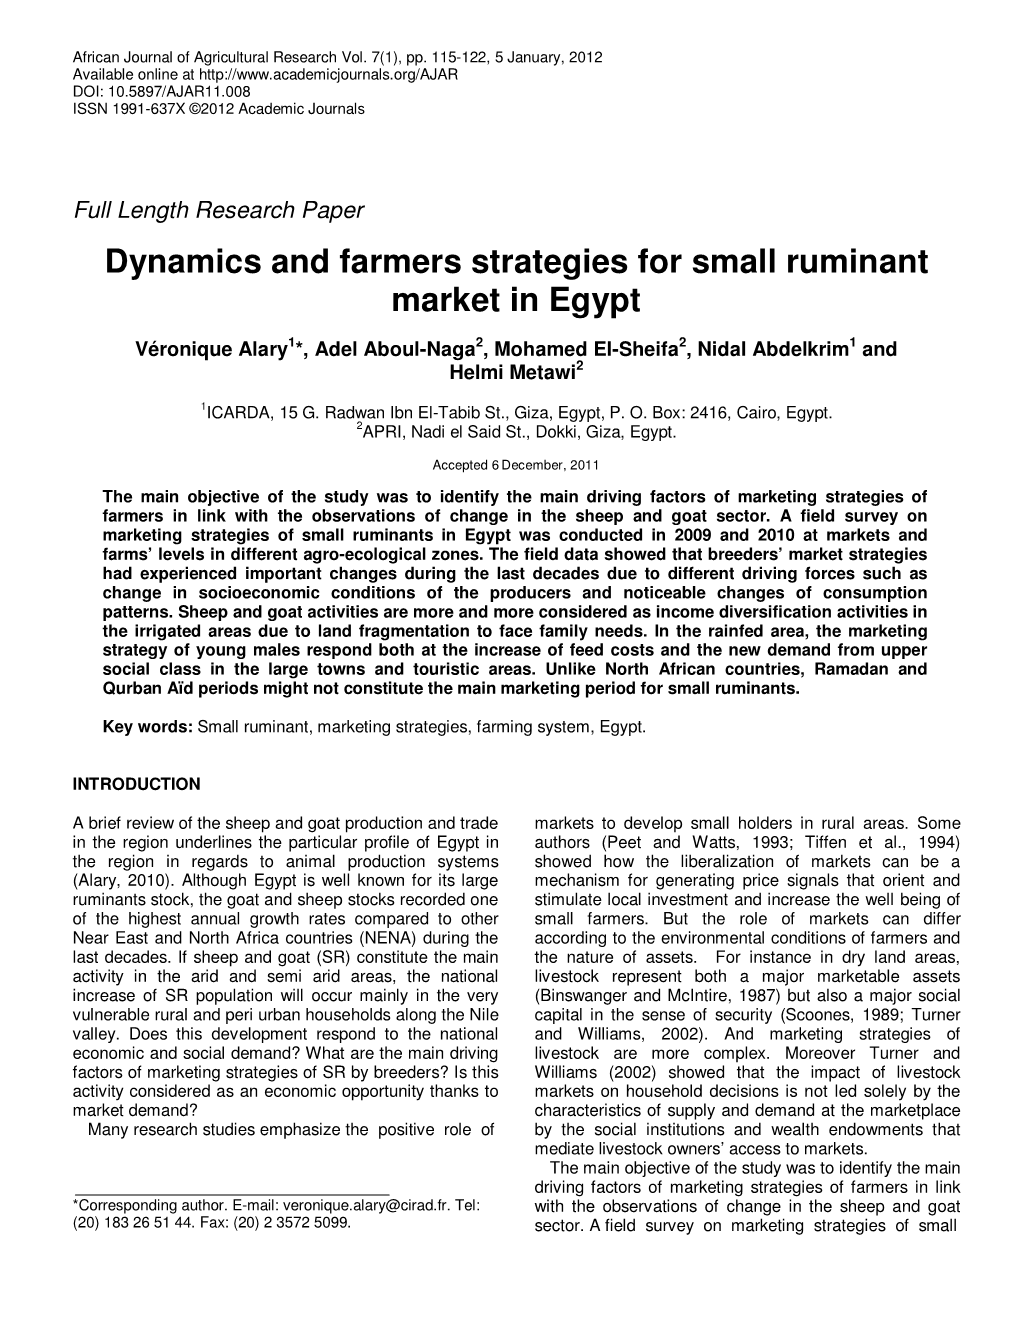 Dynamics and Farmers Strategies for Small Ruminant Market in Egypt